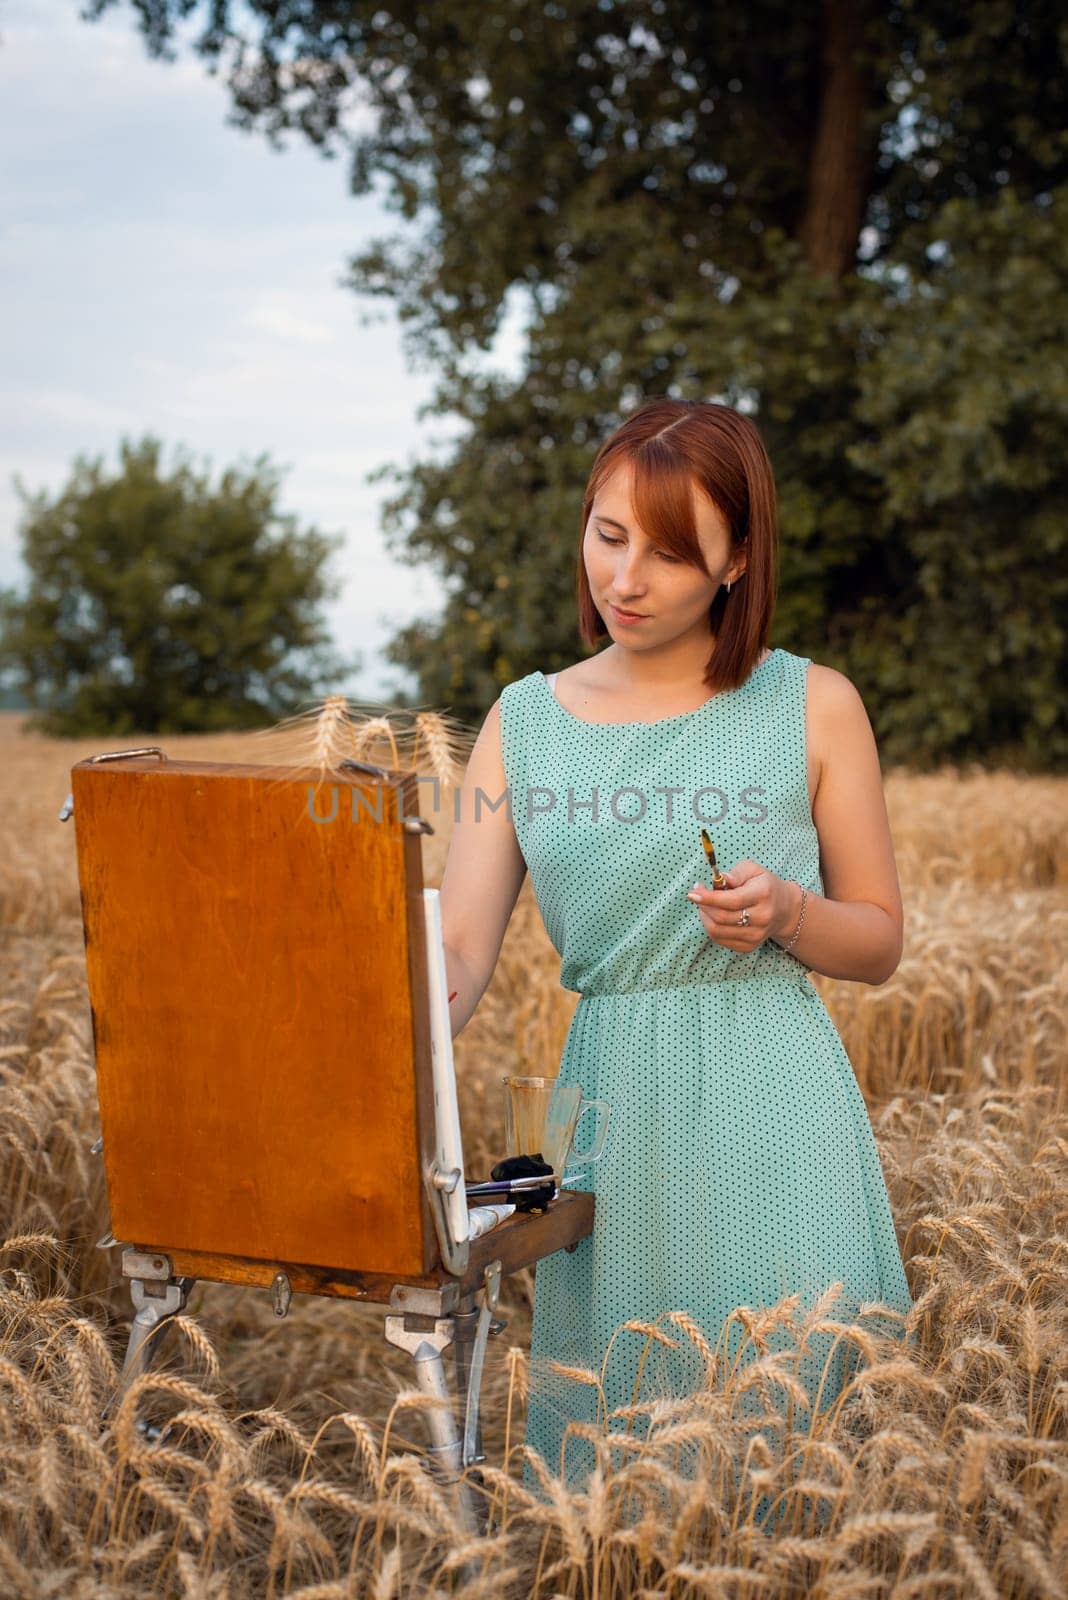 Red-headed girl artist creates work of art in the field on a warm summer day